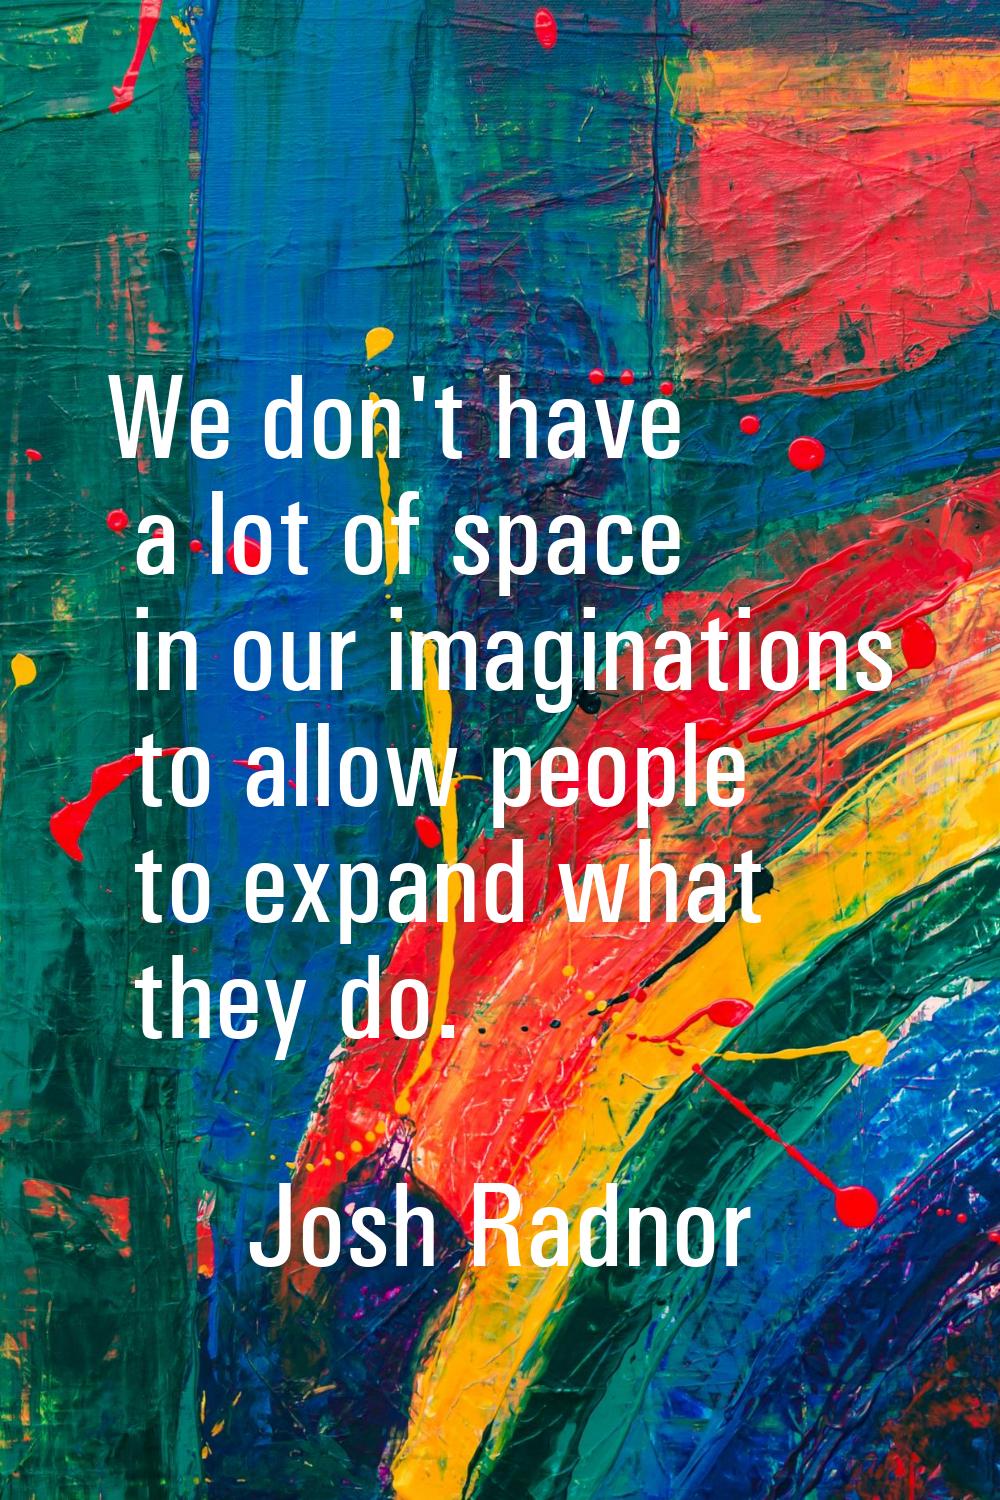 We don't have a lot of space in our imaginations to allow people to expand what they do.